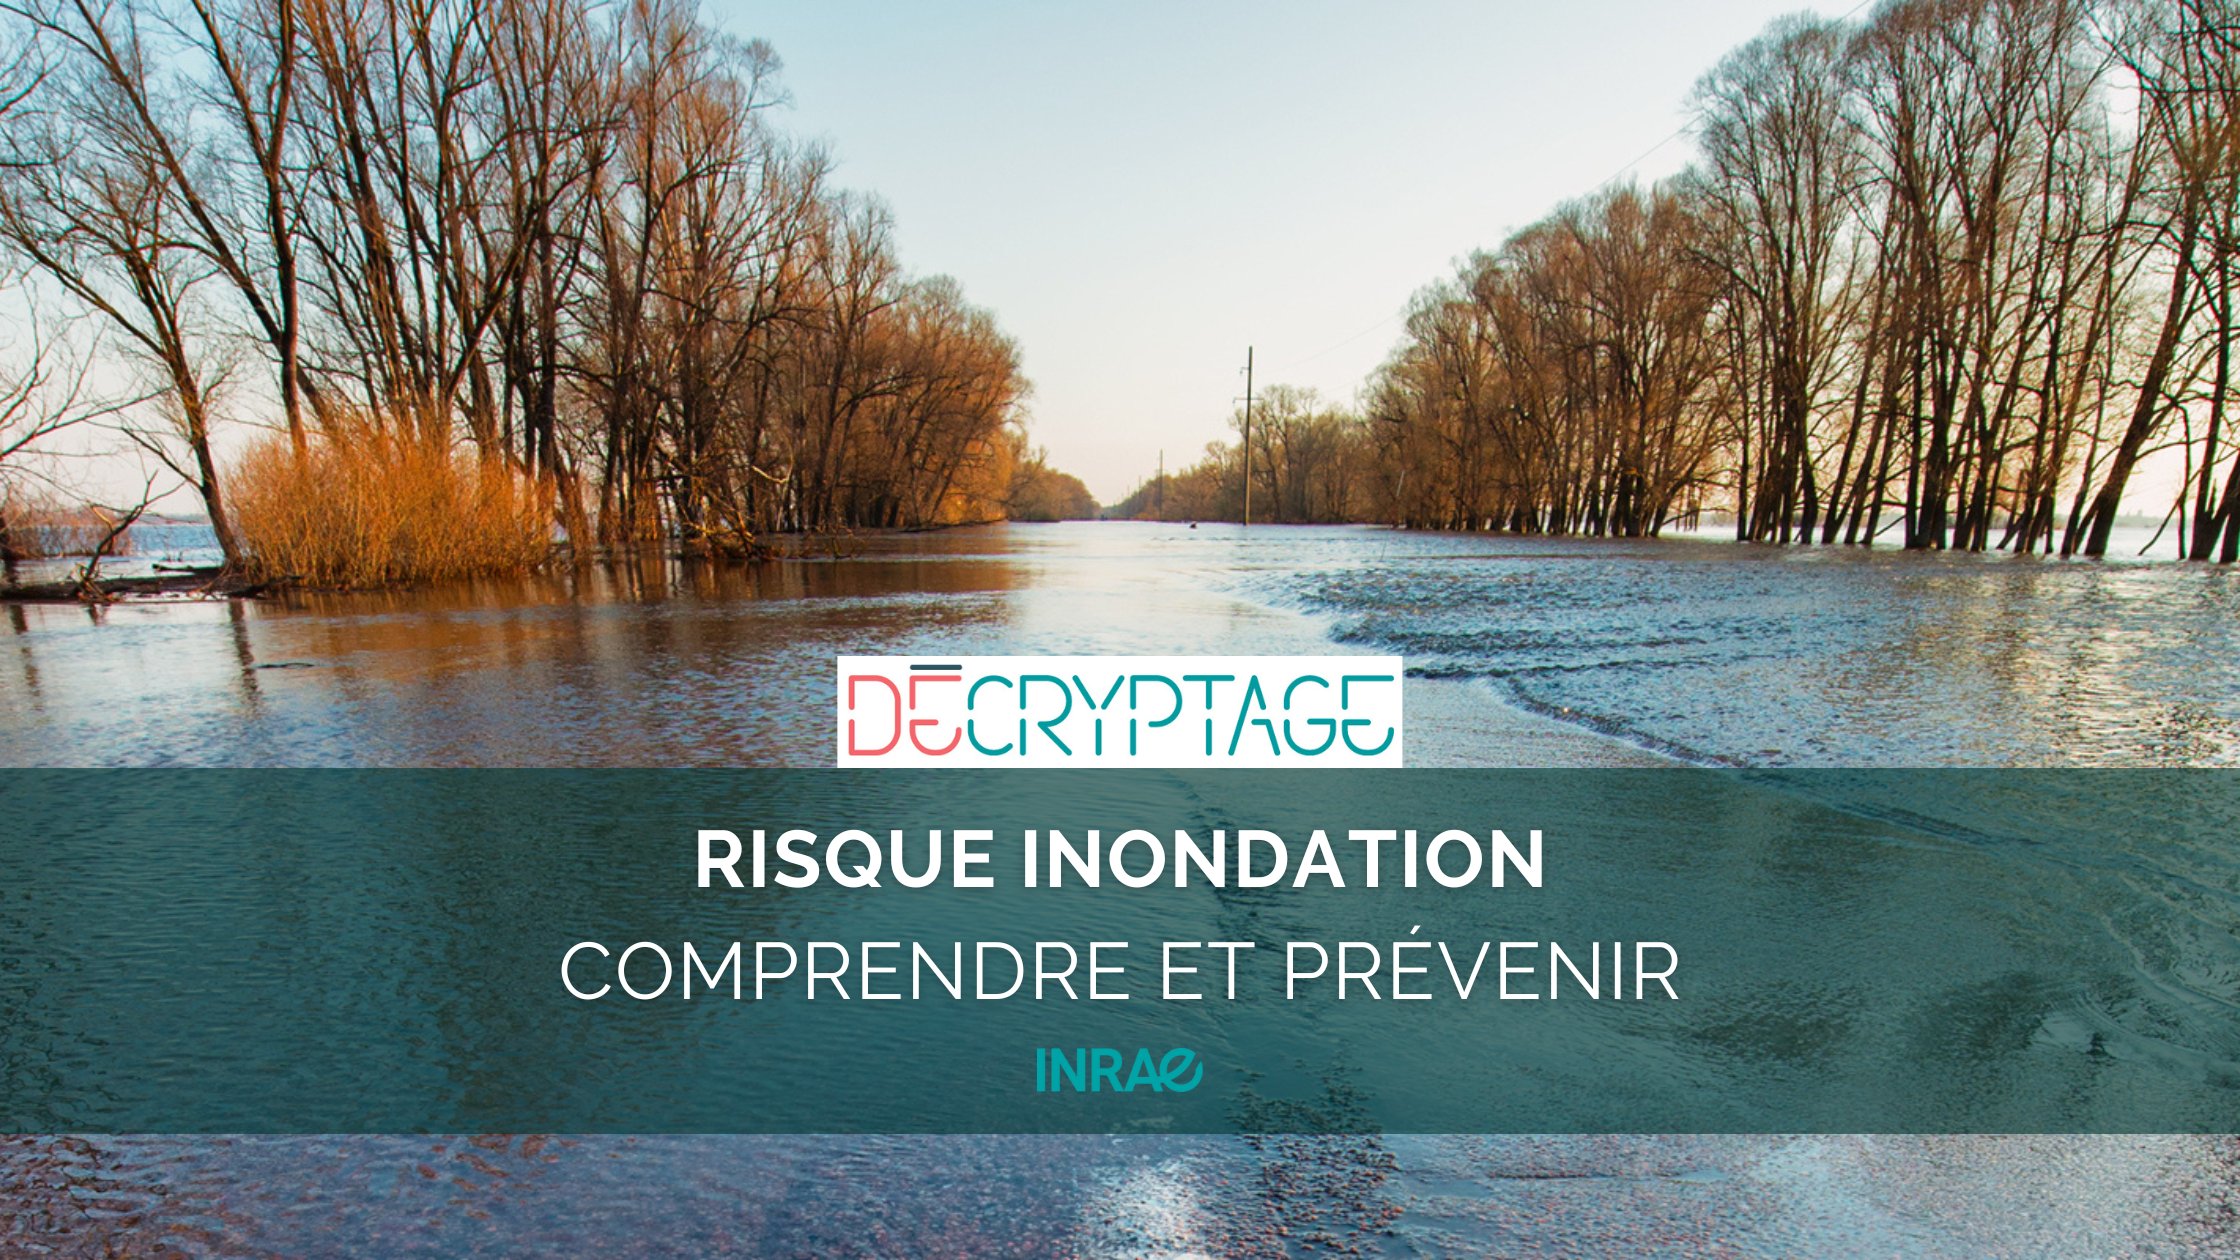 Decoding - Flood risk, understanding and anticipating